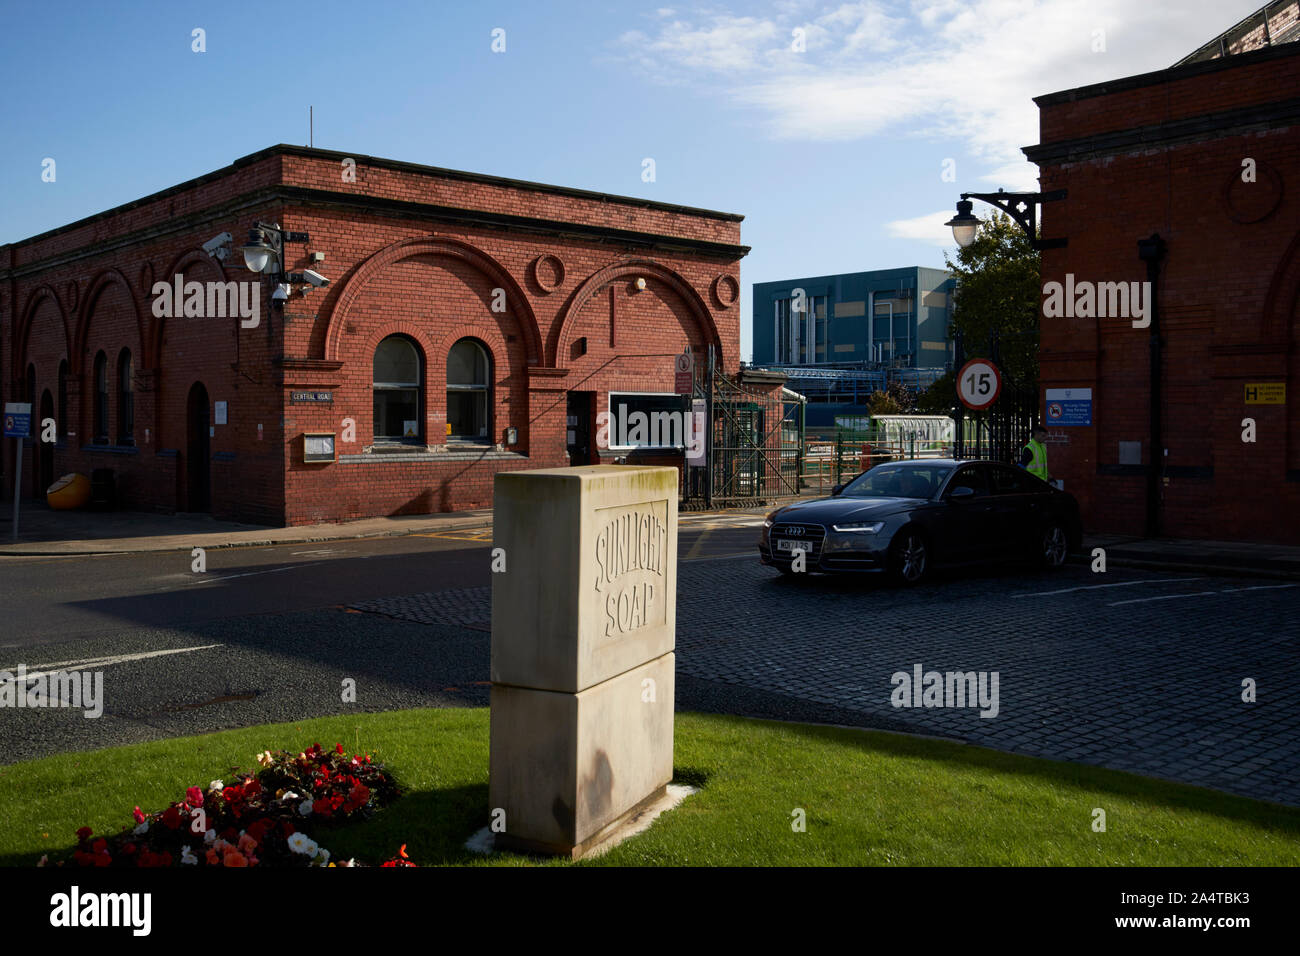 works entrance to lever brothers sunlight soap factory Port Sunlight England UK Stock Photo